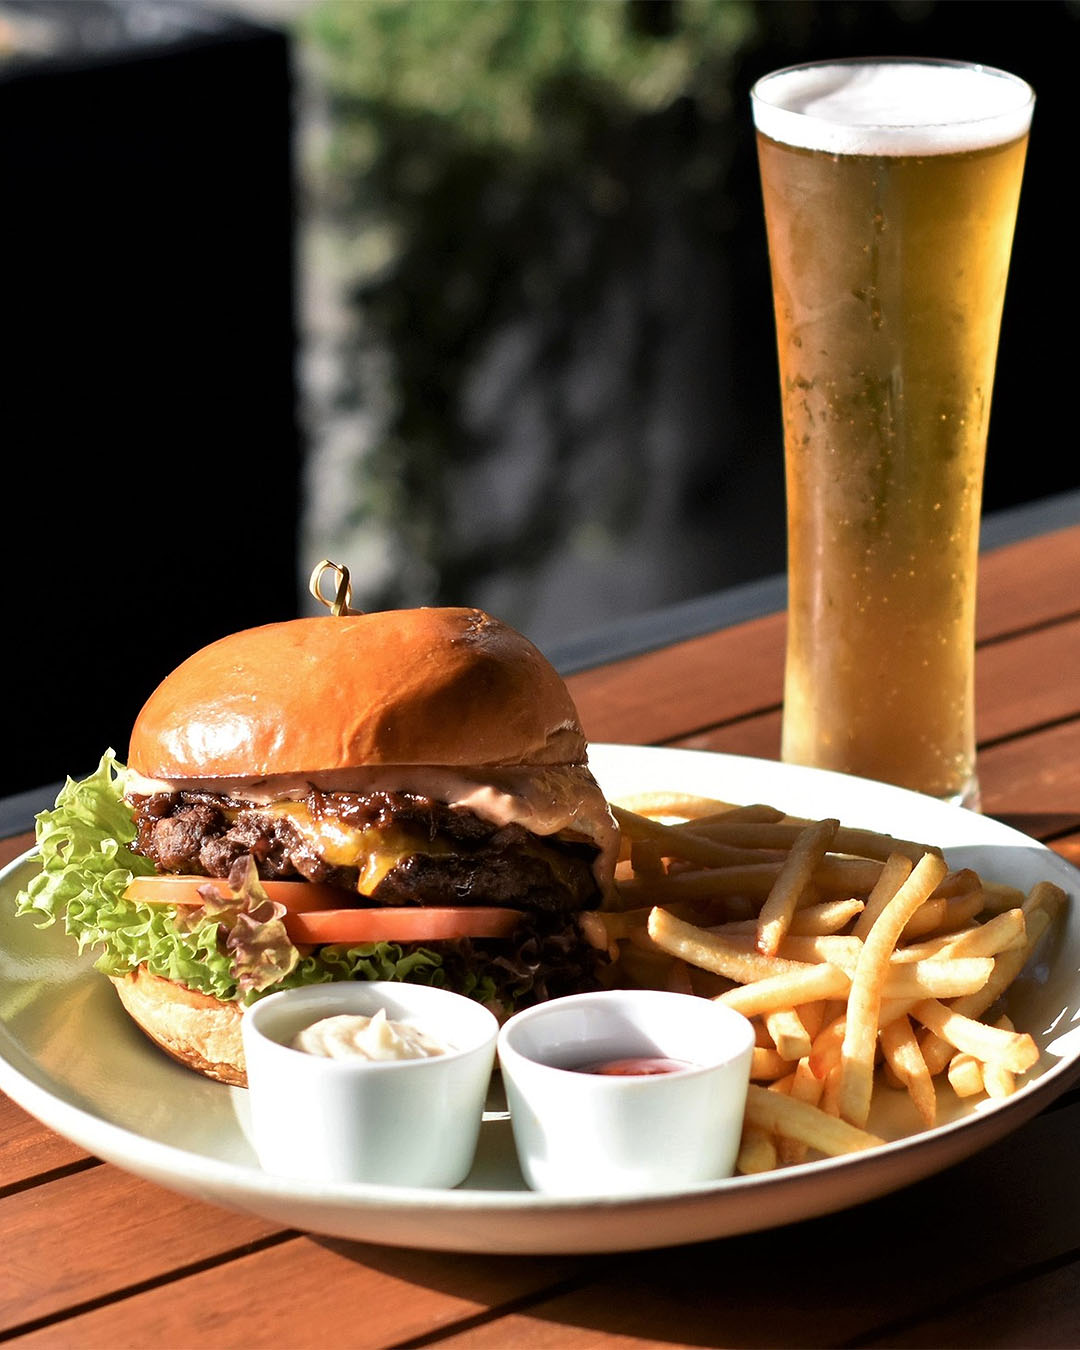 A gorgeous looking burger and beer in the sun at The Pantry.